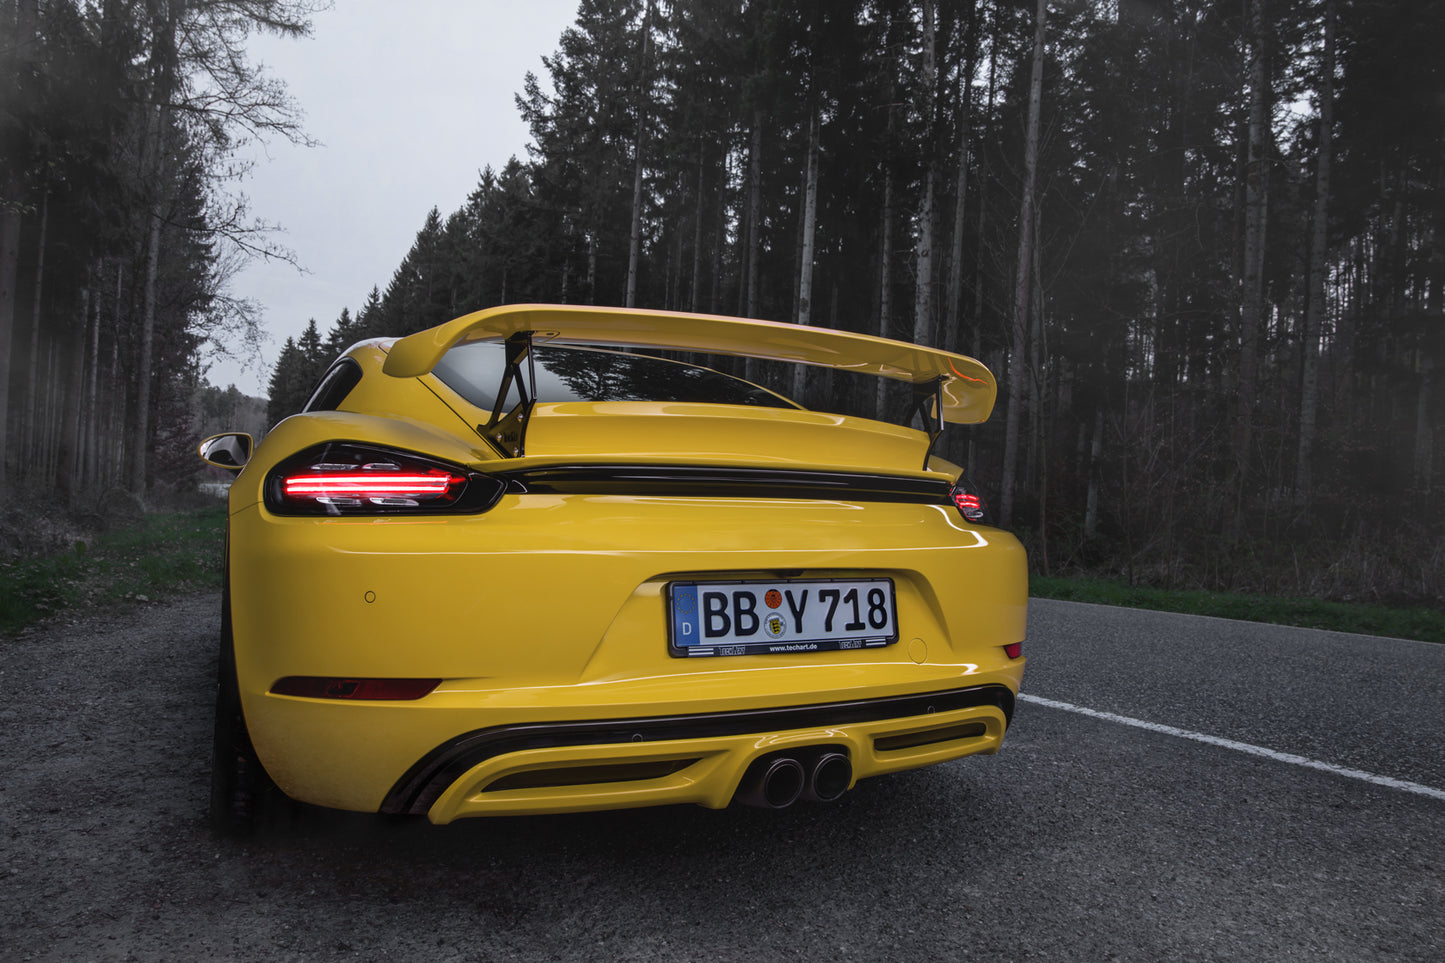 TECHART Diffusor Add-On for 718 Boxster & Cayman